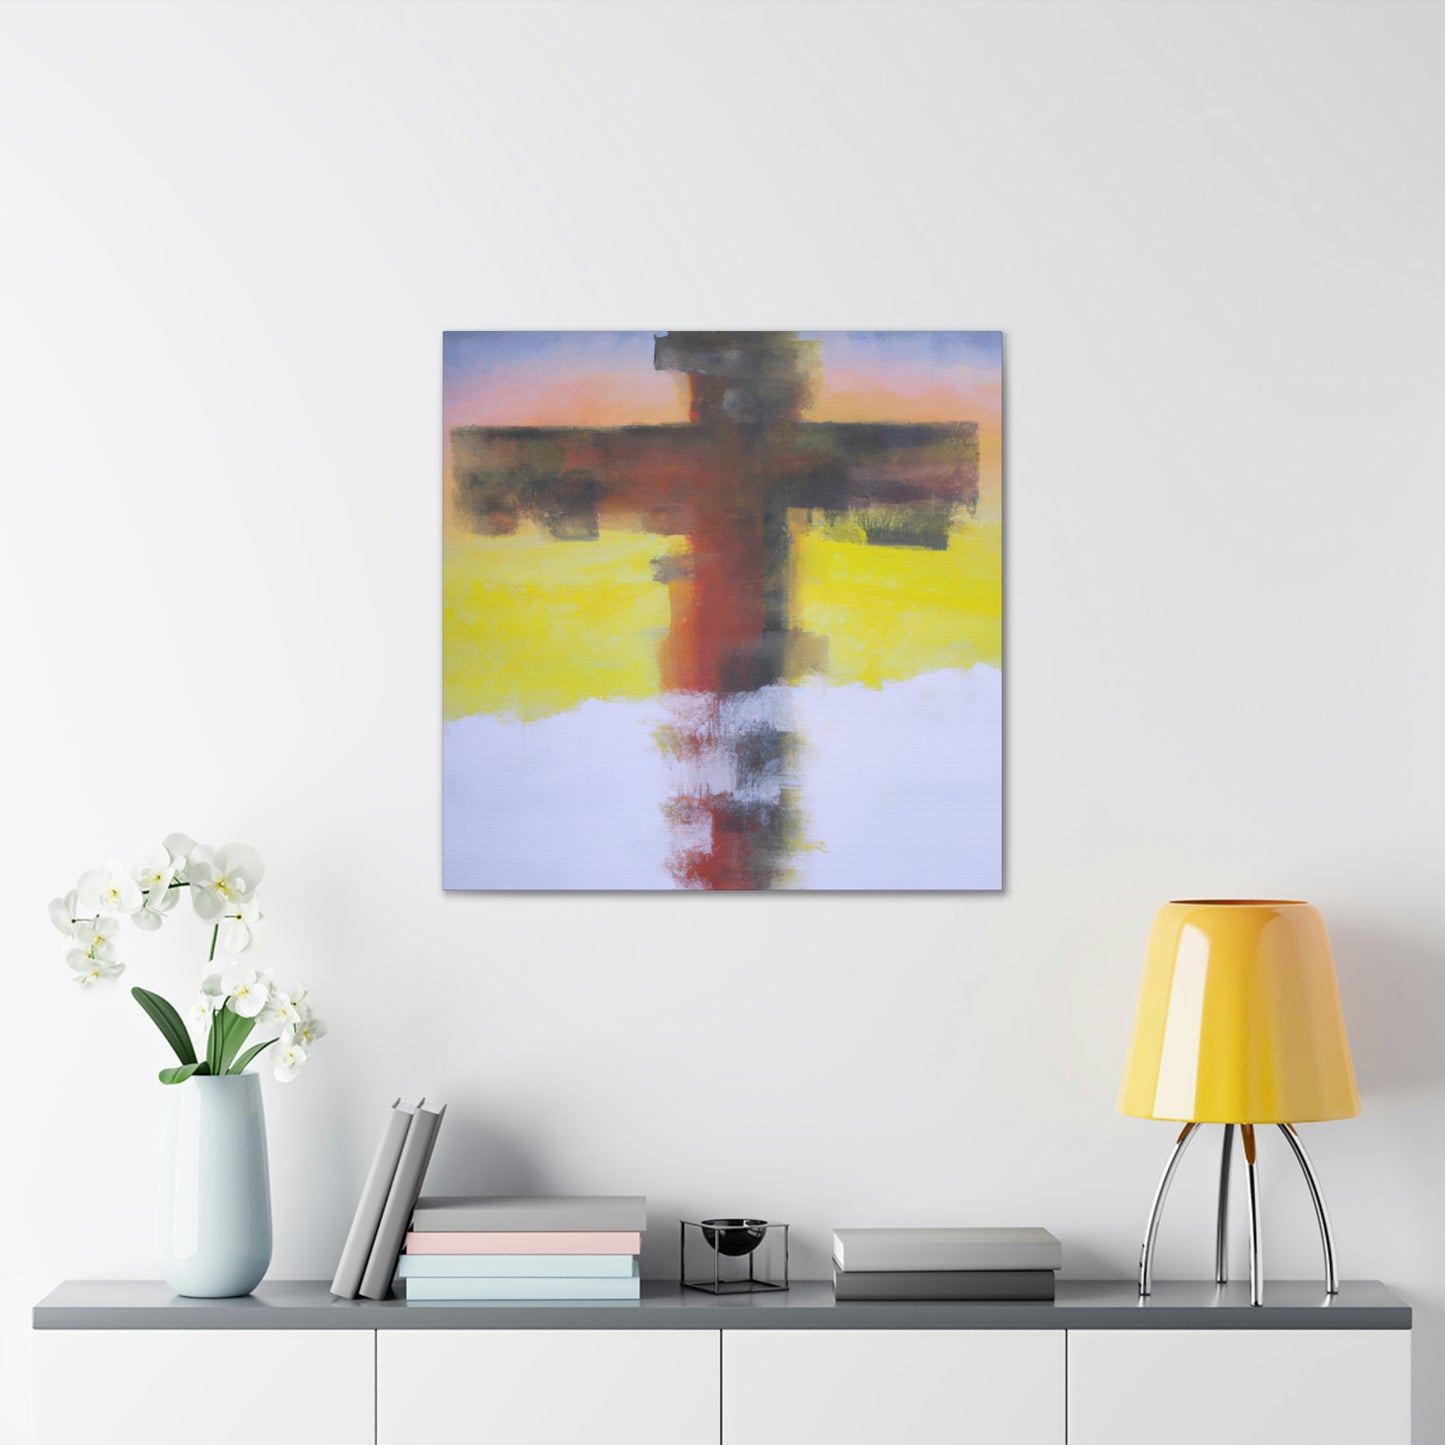 Hebrews 12:1 
"Therefore, since we are surrounded by such a great cloud of witnesses, let us throw off everything that hinders and the sin that so easily entangles. And let us run with perseverance the - Canvas Wall Art